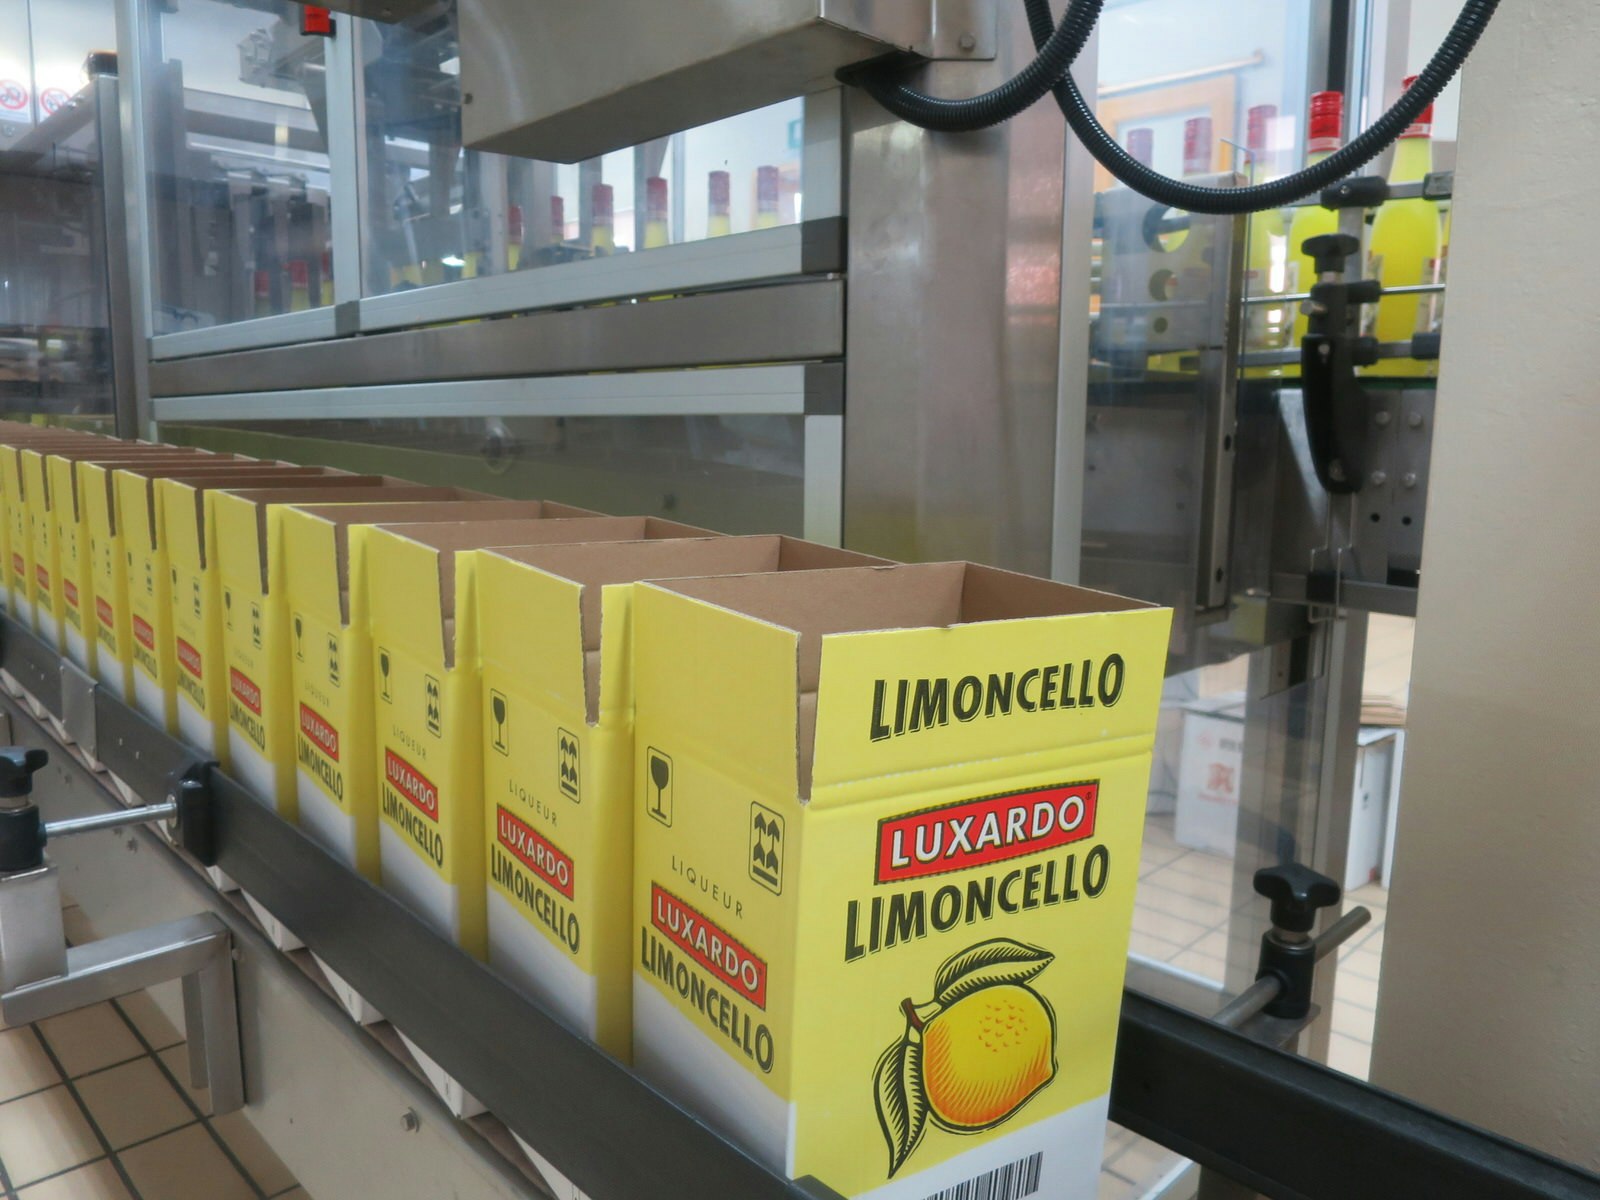 several yellow cardboard boxes with the Luxardo Limoncello branding are lined up on a conveyor belt, ready to be sealed